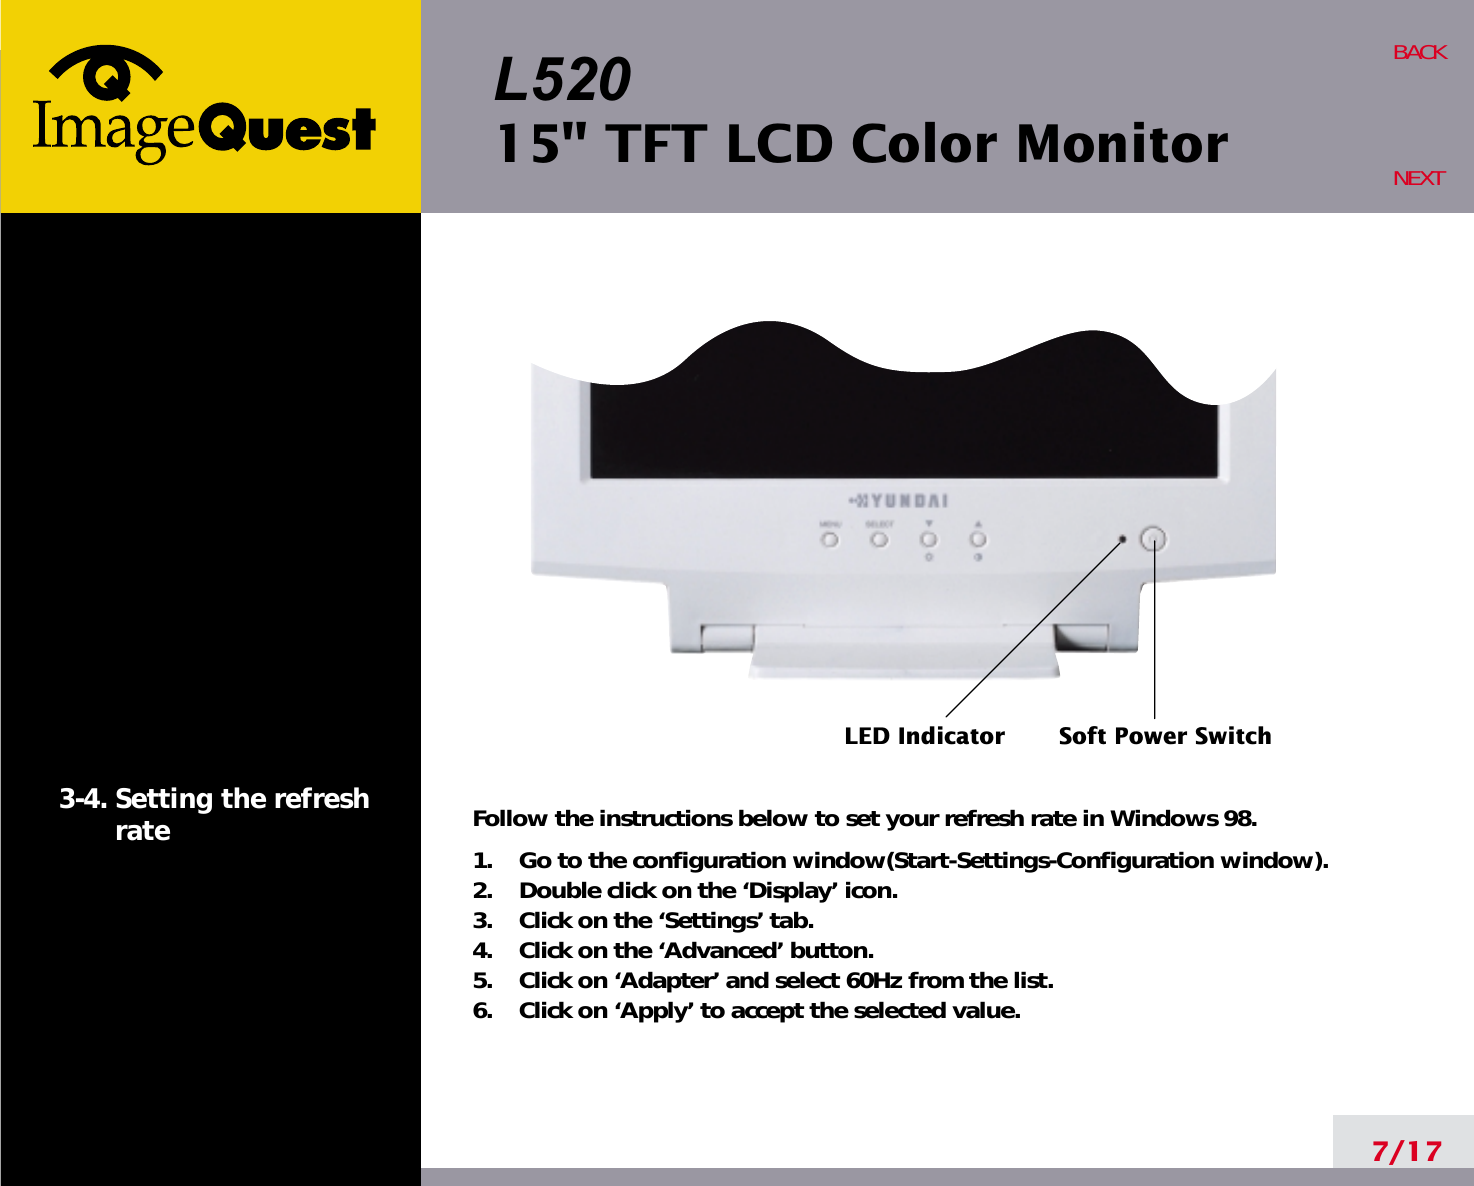 L52015&quot; TFT LCD Color Monitor7/17BACKNEXT3-4. Setting the refreshrate Follow the instructions below to set your refresh rate in Windows 98.1.    Go to the configuration window(Start-Settings-Configuration window).2.    Double click on the ‘Display’ icon.3.    Click on the ‘Settings’ tab.4.    Click on the ‘Advanced’ button.5.    Click on ‘Adapter’ and select 60Hz from the list.6.    Click on ‘Apply’ to accept the selected value.LED Indicator Soft Power Switch